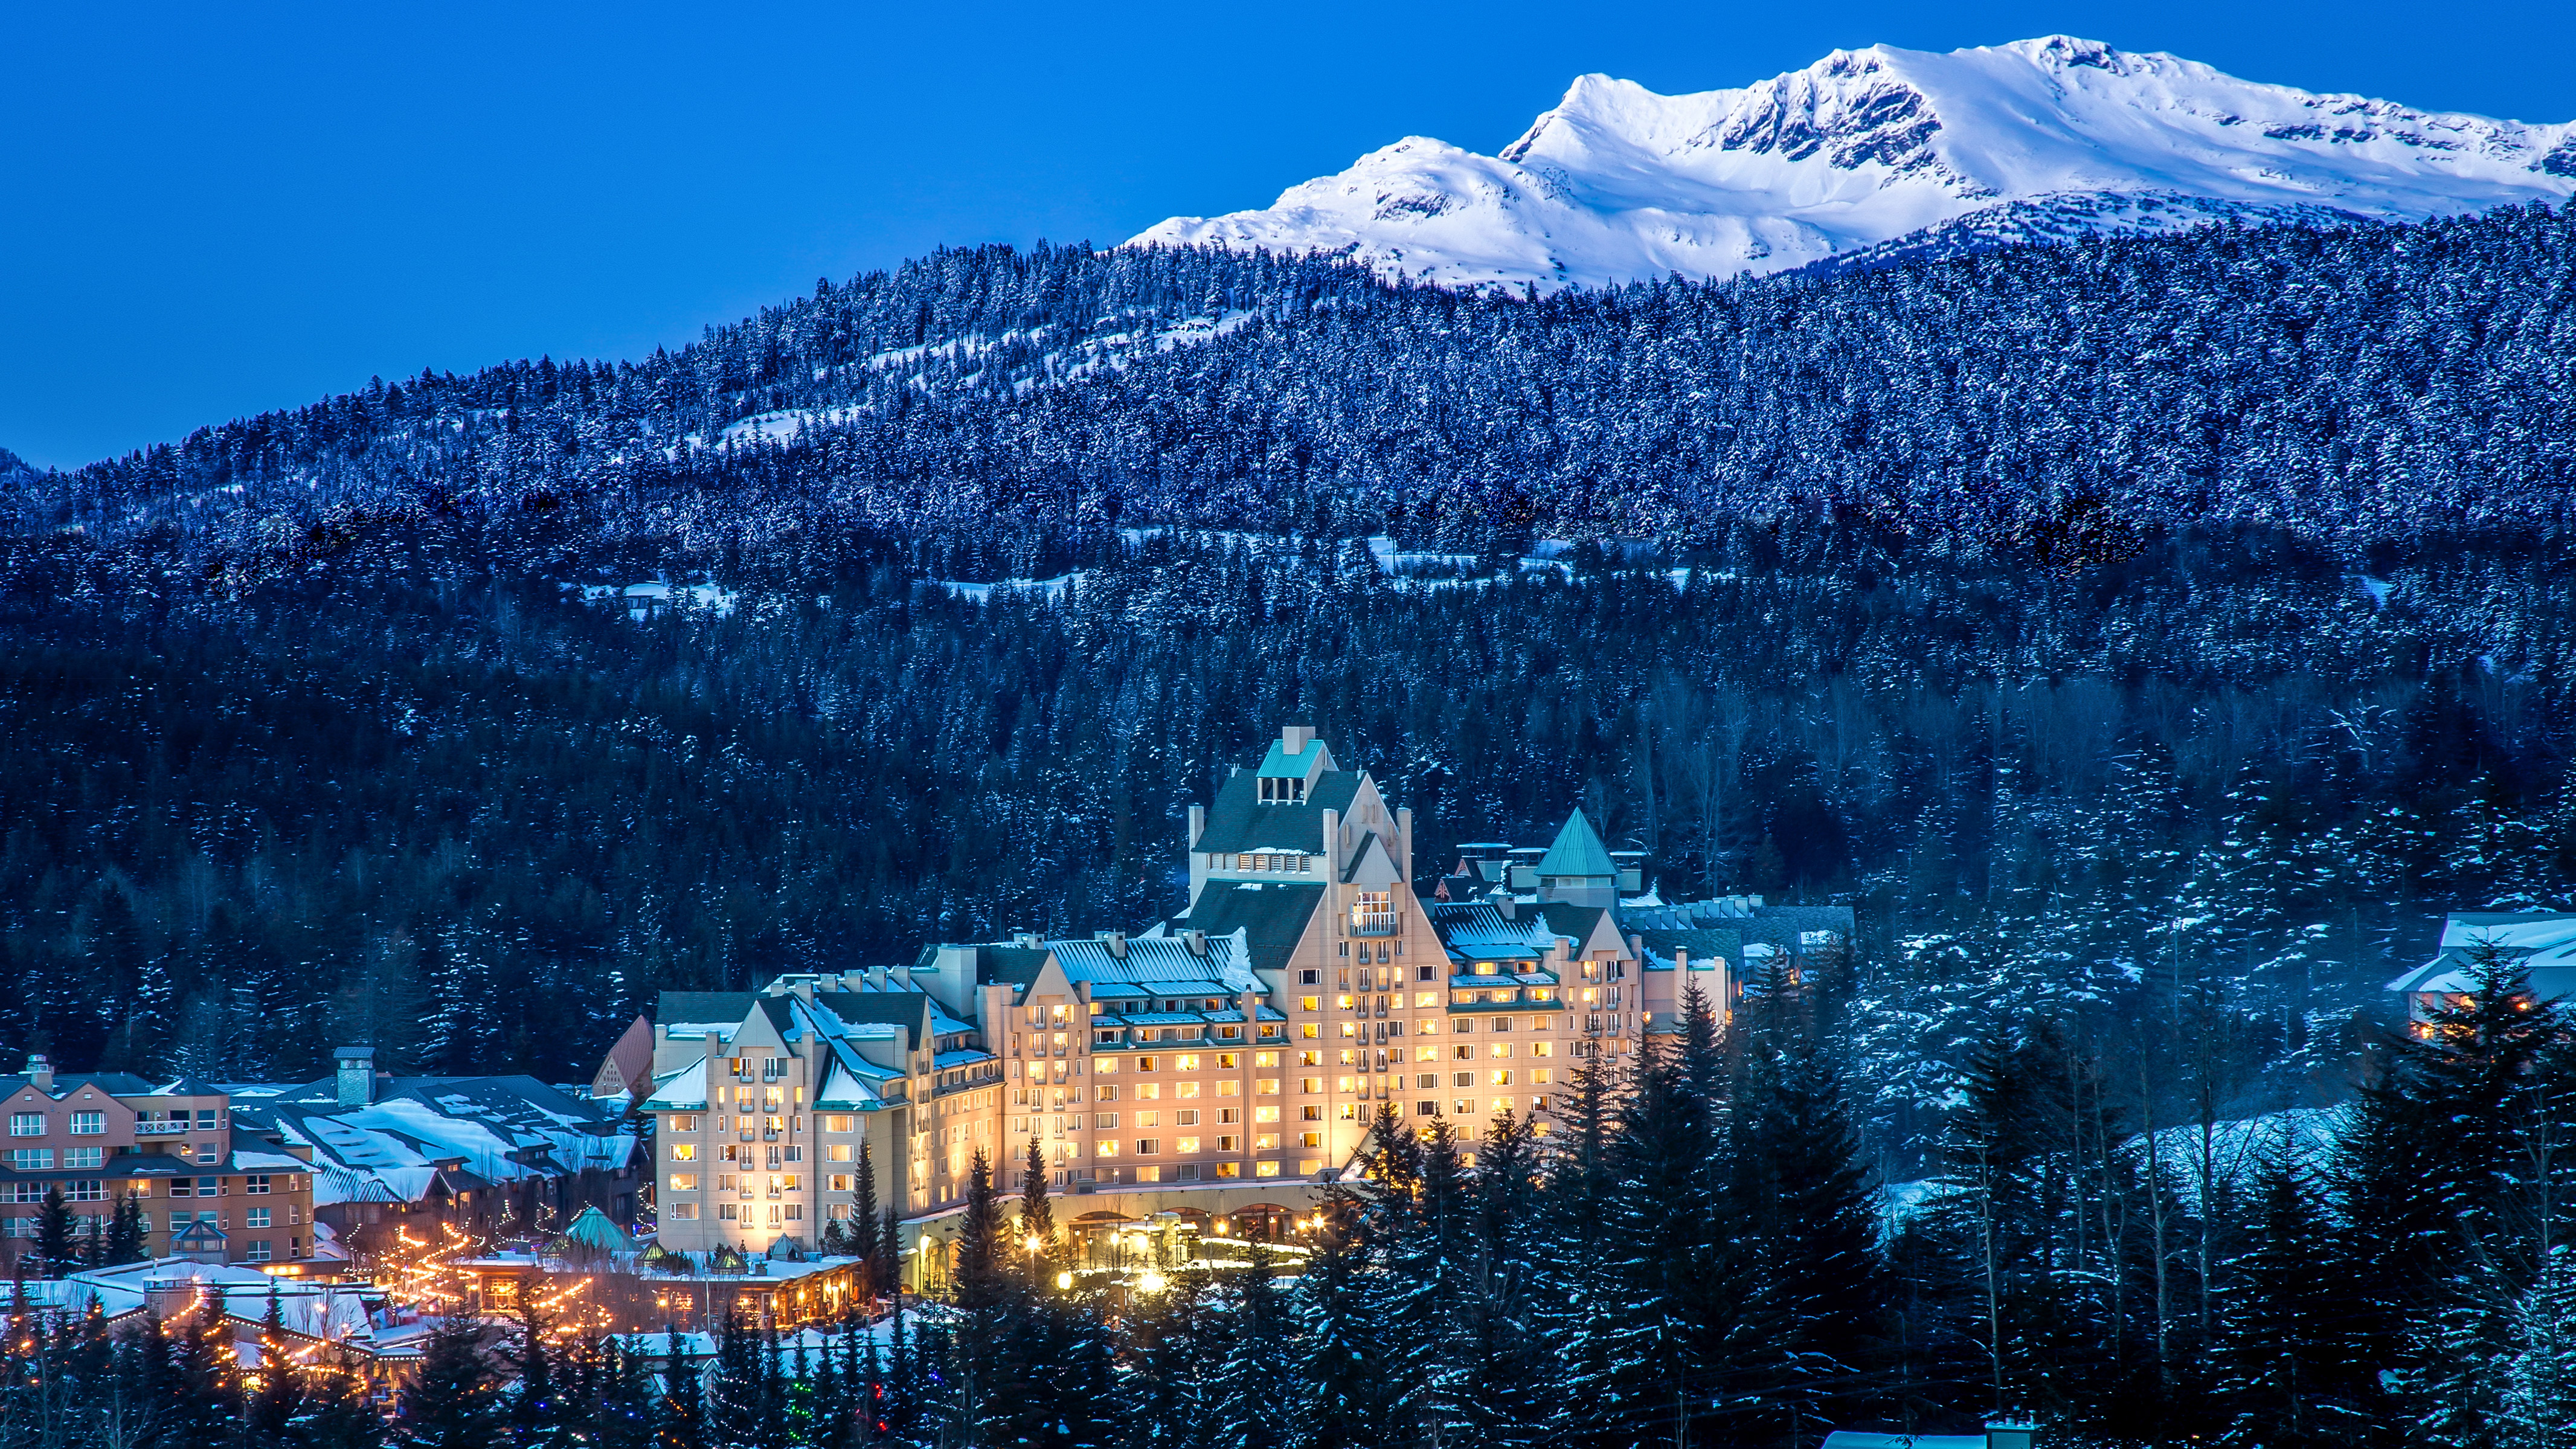 The Fairmont Chateau in Whistler, British Columbia. 